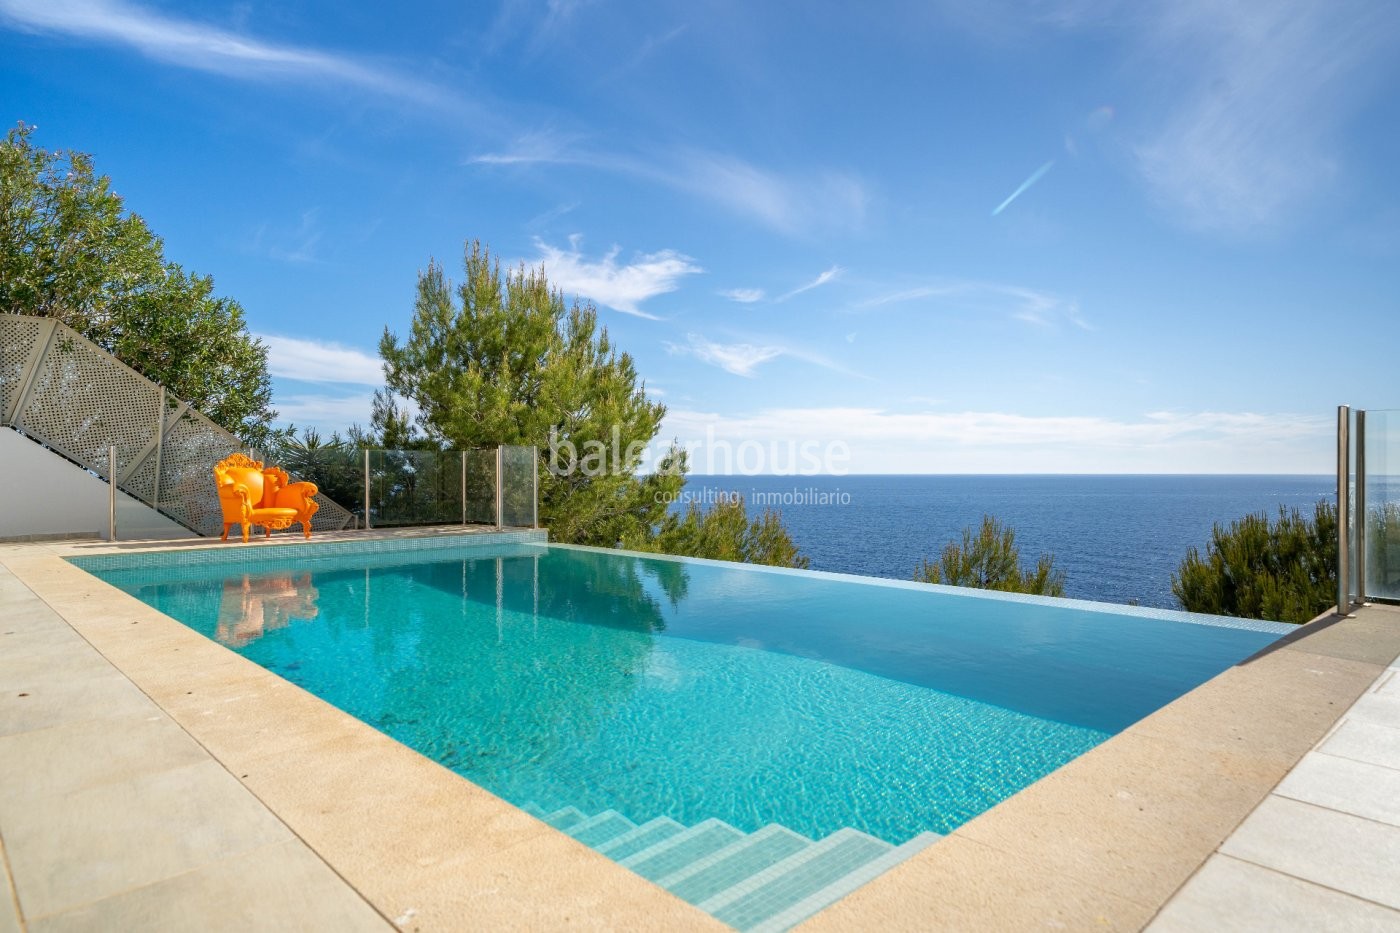 Seafront villa in Port Adriano designed as a spectacular viewpoint overlooking the Mediterranean.